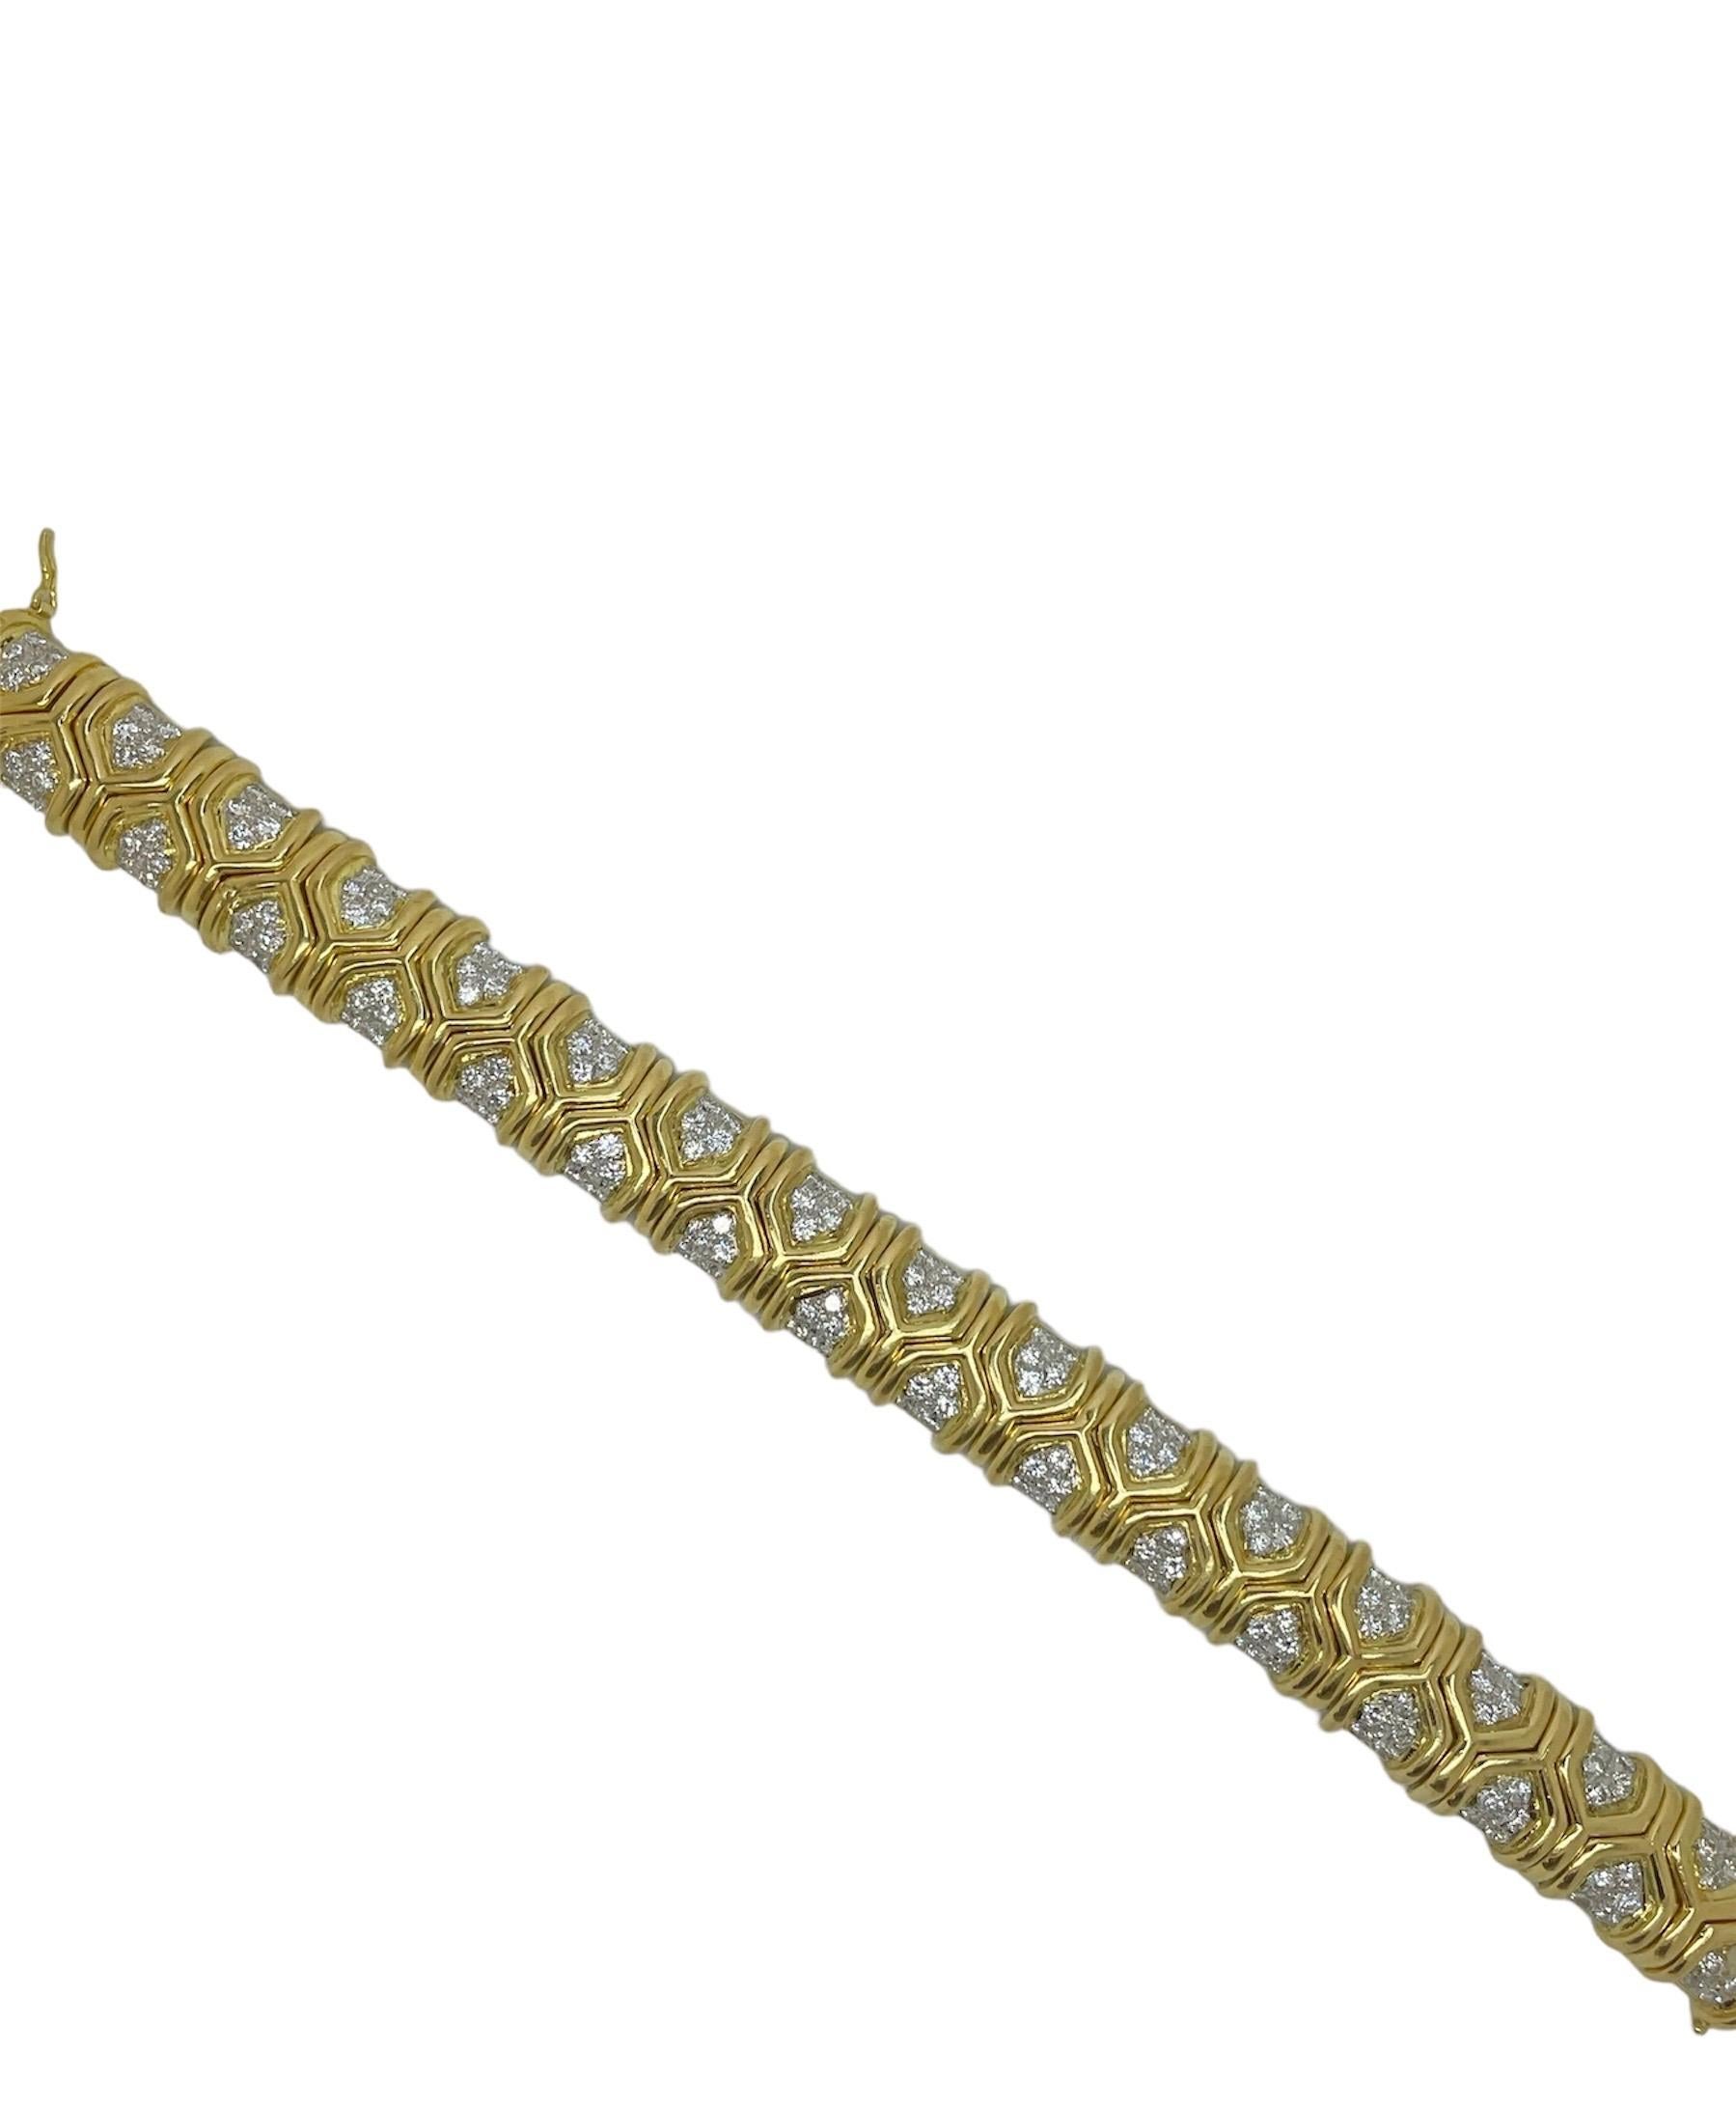 This beautifully made statement bracelet is made in 18 karat yellow gold with a geometric design decorated with top quality round brilliant cut diamonds weighing approximately 6.75 carats total. Perfect to brighten up any look!

Gross weight: 86.50